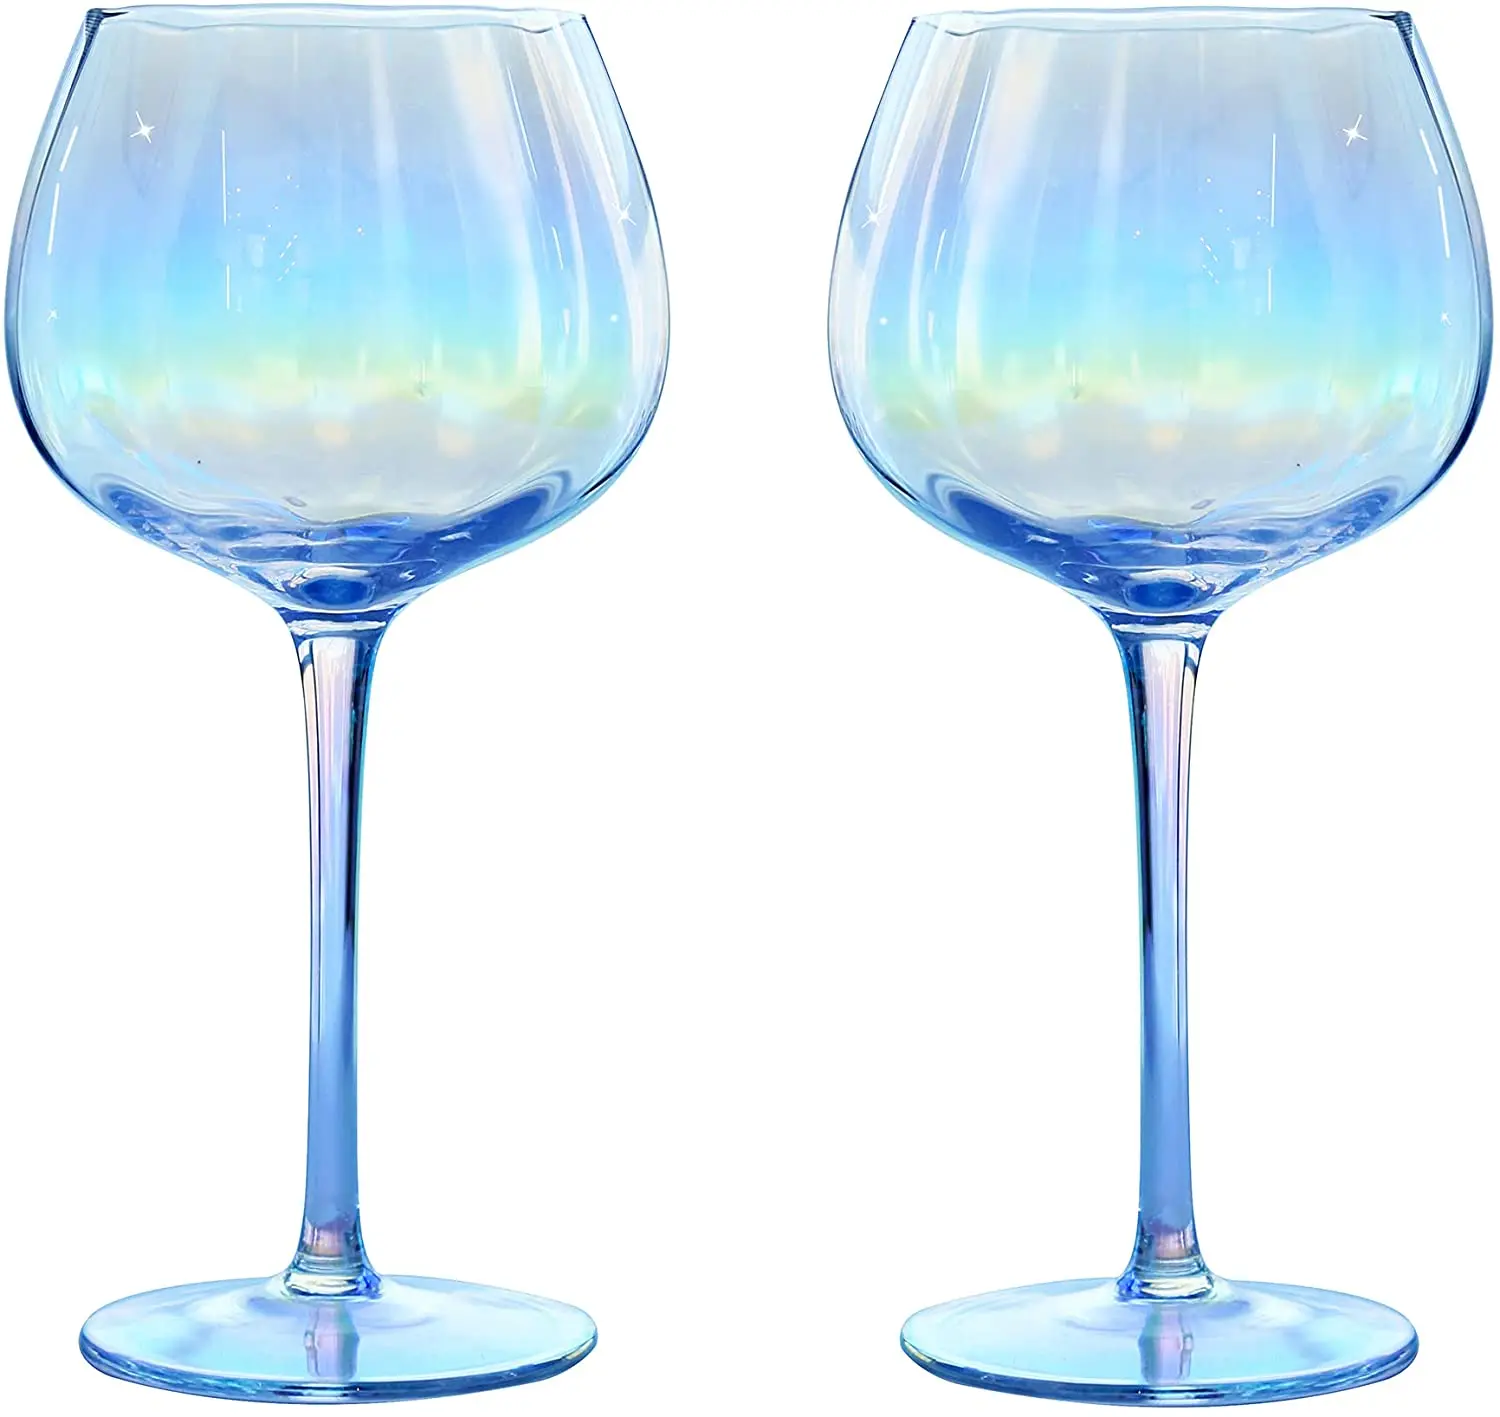 Iridescent Wine Glasses with Crystal-Filled Stems